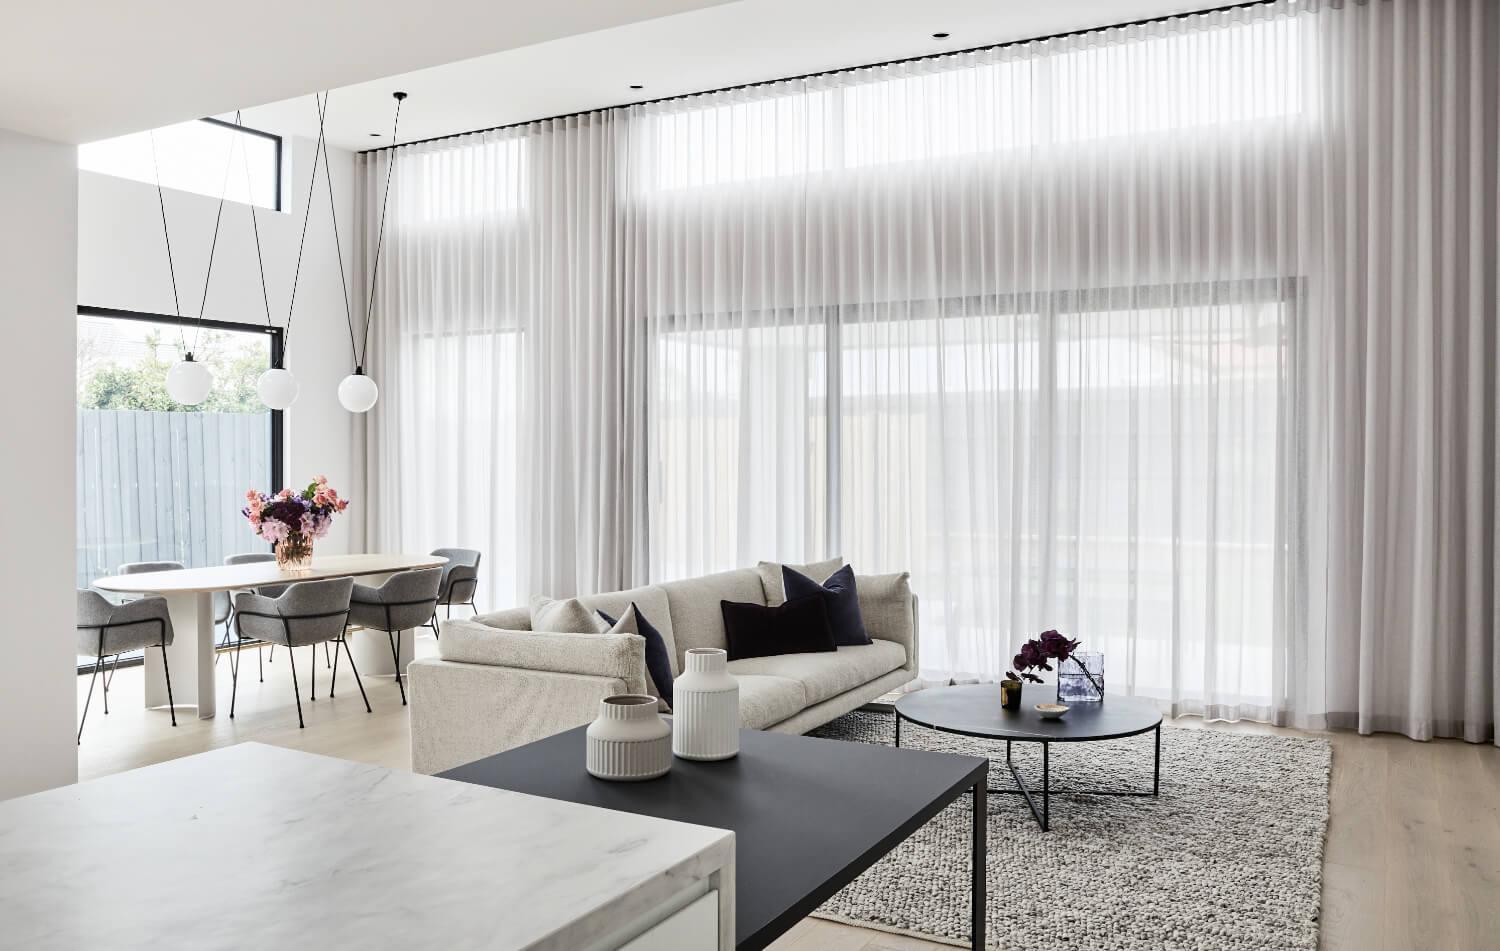 Floor To Ceiling Windows And Sheer Curtains Create An Expansive Feel